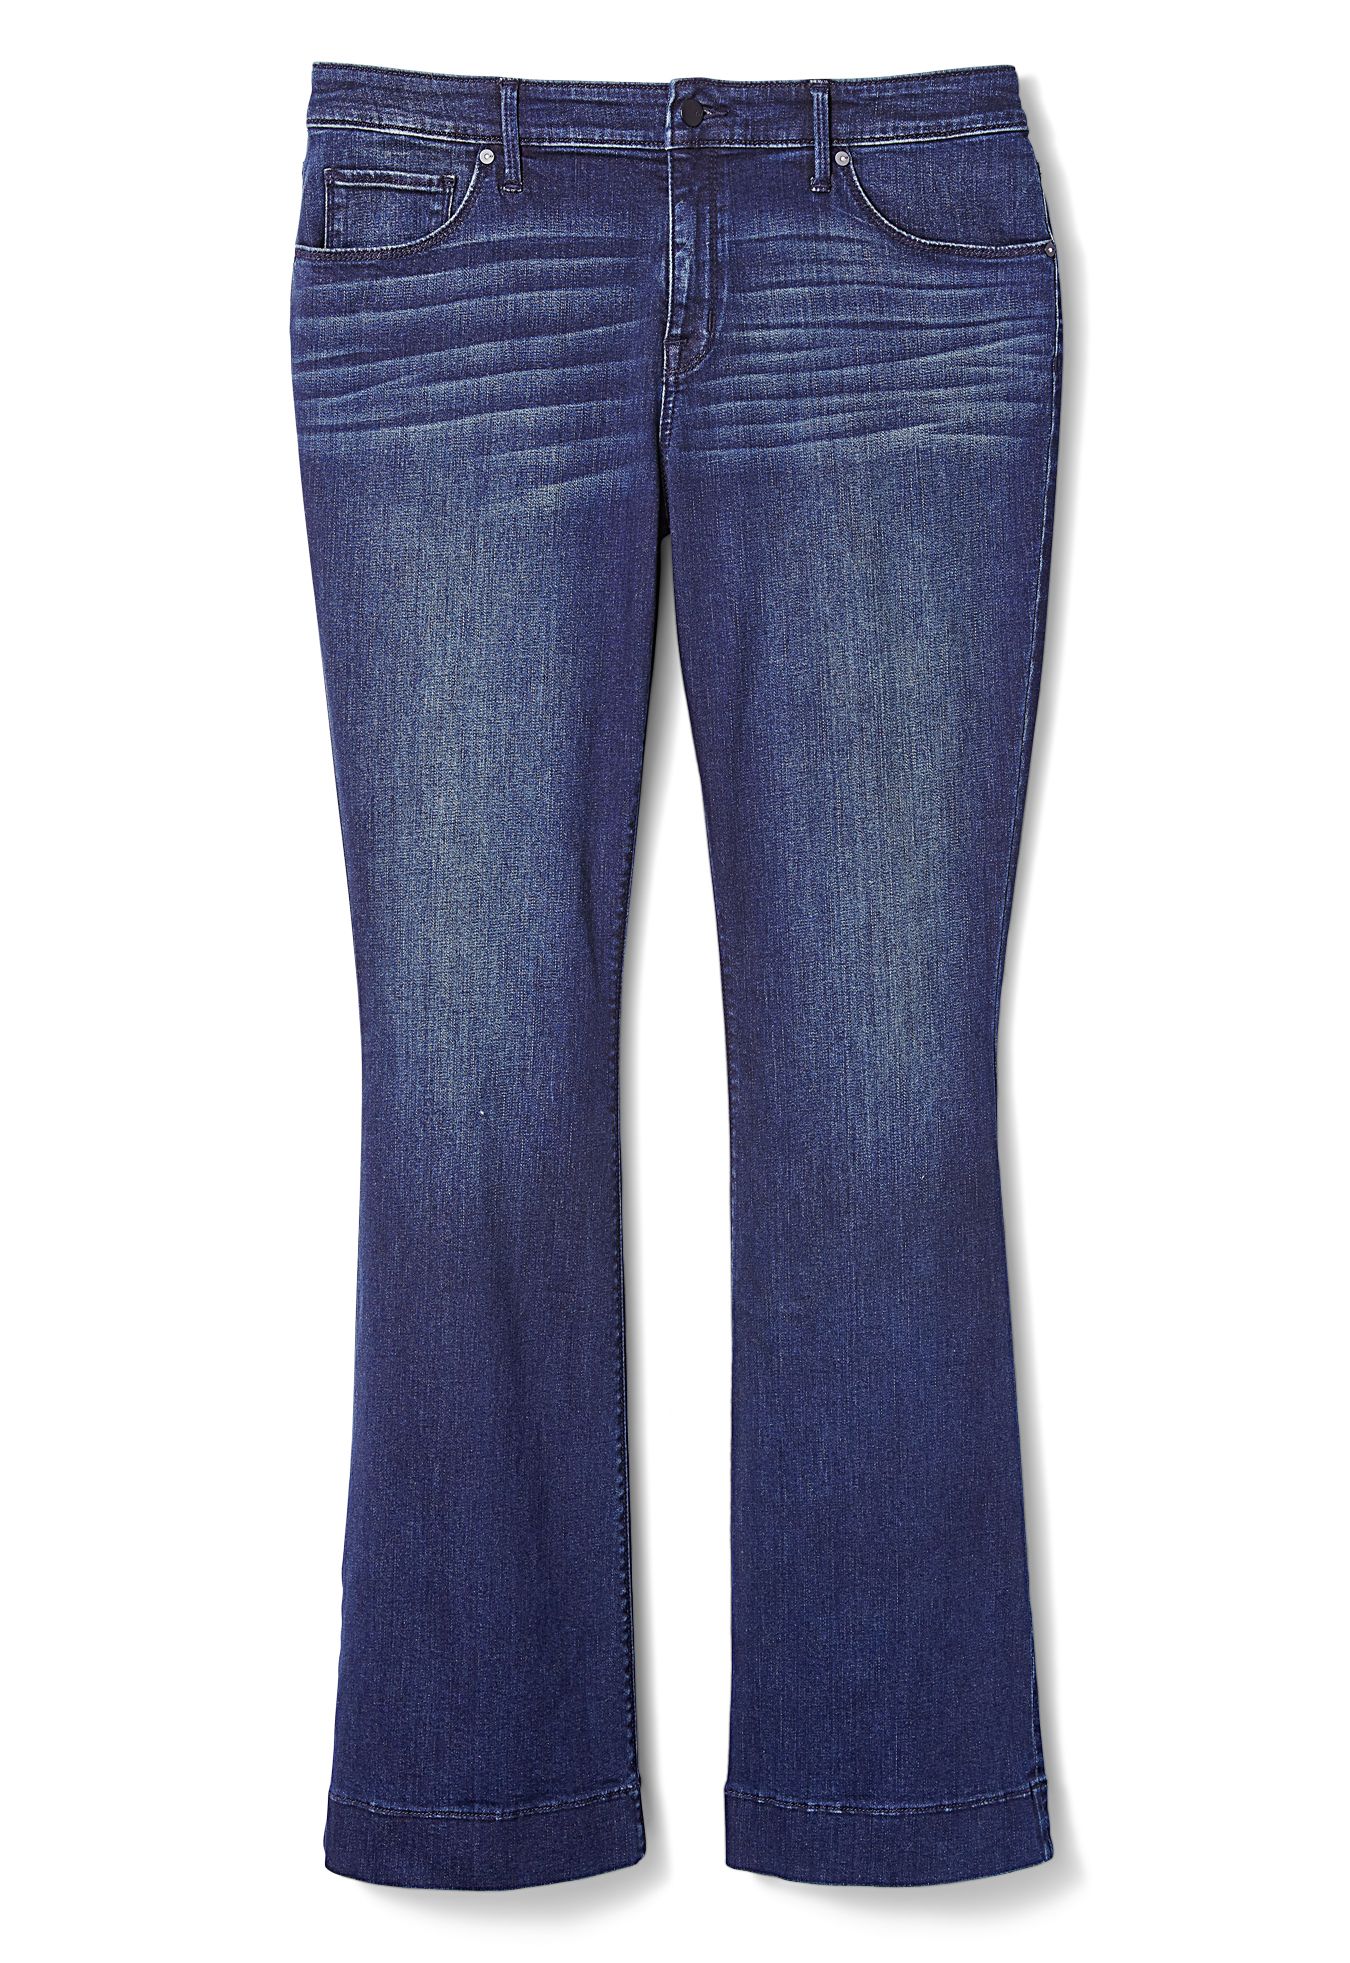 curvy appeal jeans